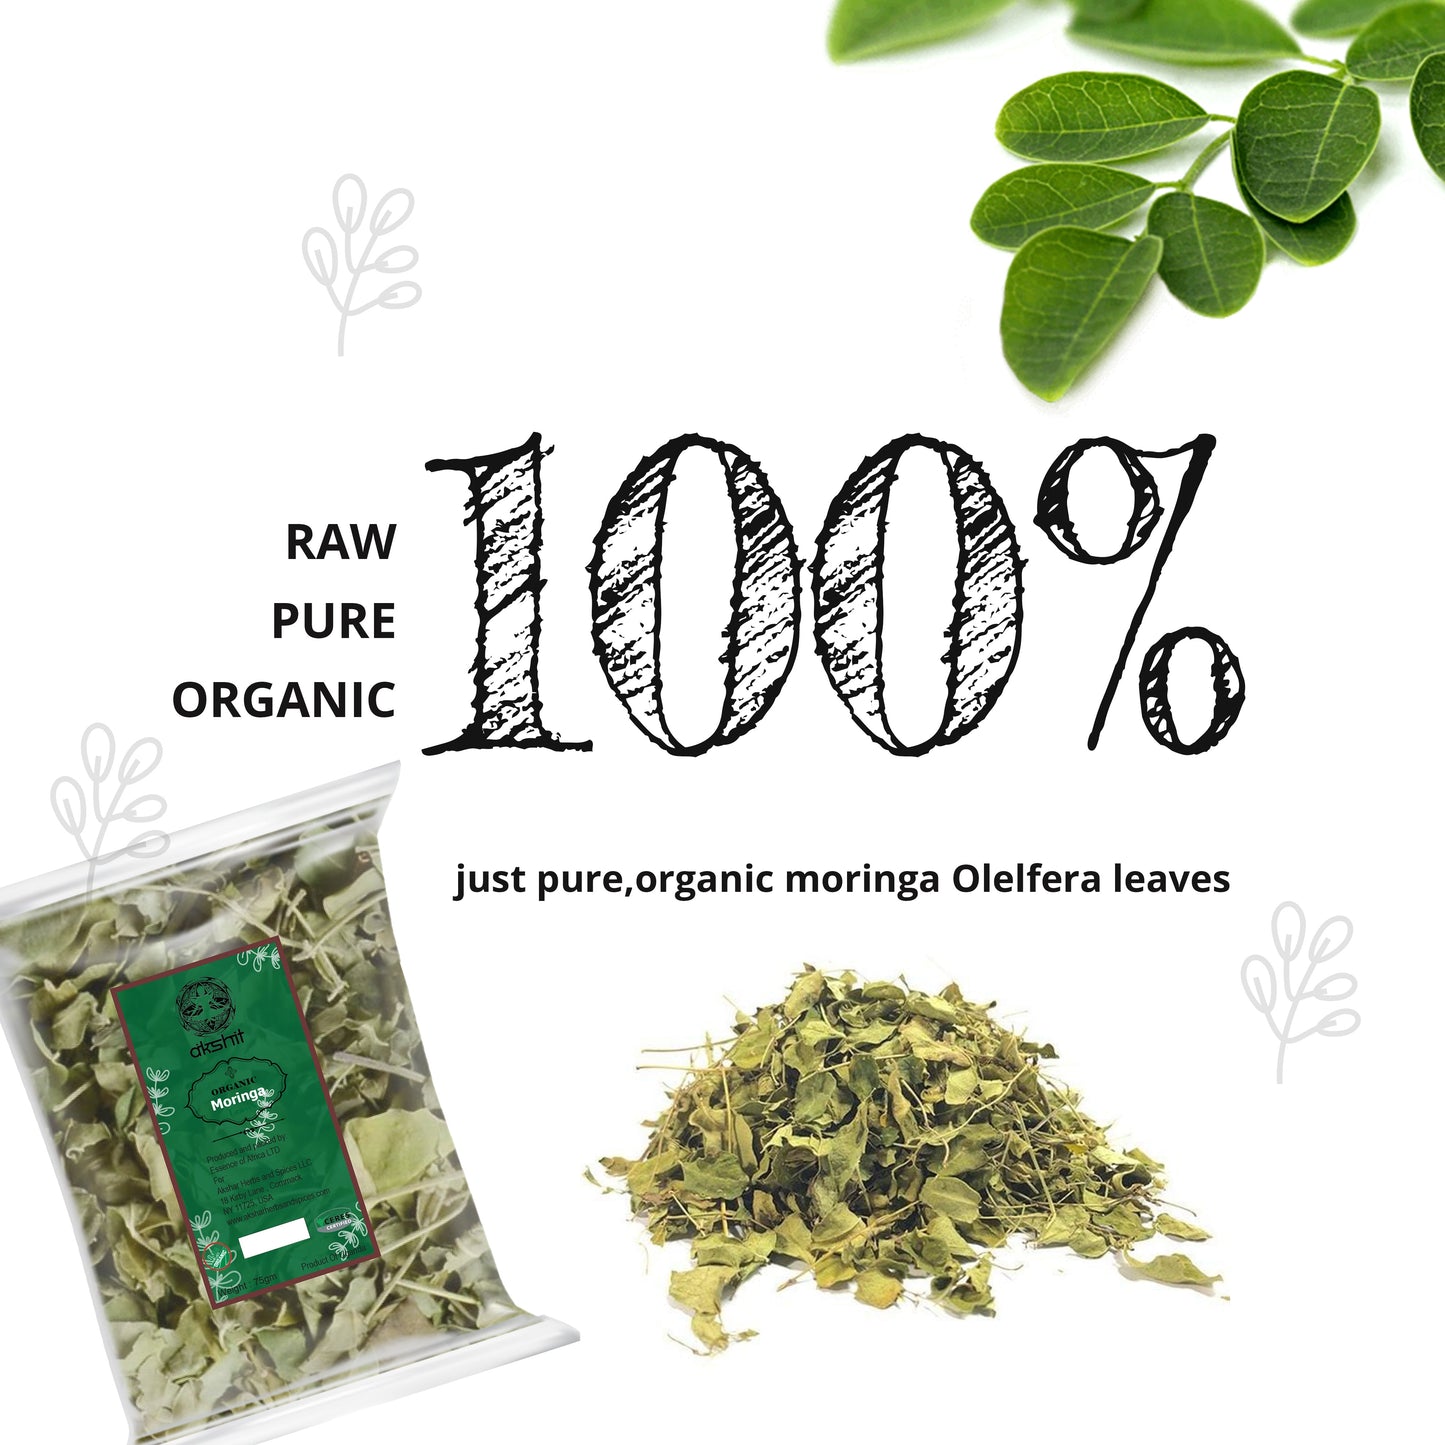 Moringa is a nutrient-packed food that comes from the Moringa oleifera tree in India. Moringa oleifera leaves, seeds, bark, roots, sap, and flowers have long been used in traditional medicine throughout South Asia and Southeast Asia.